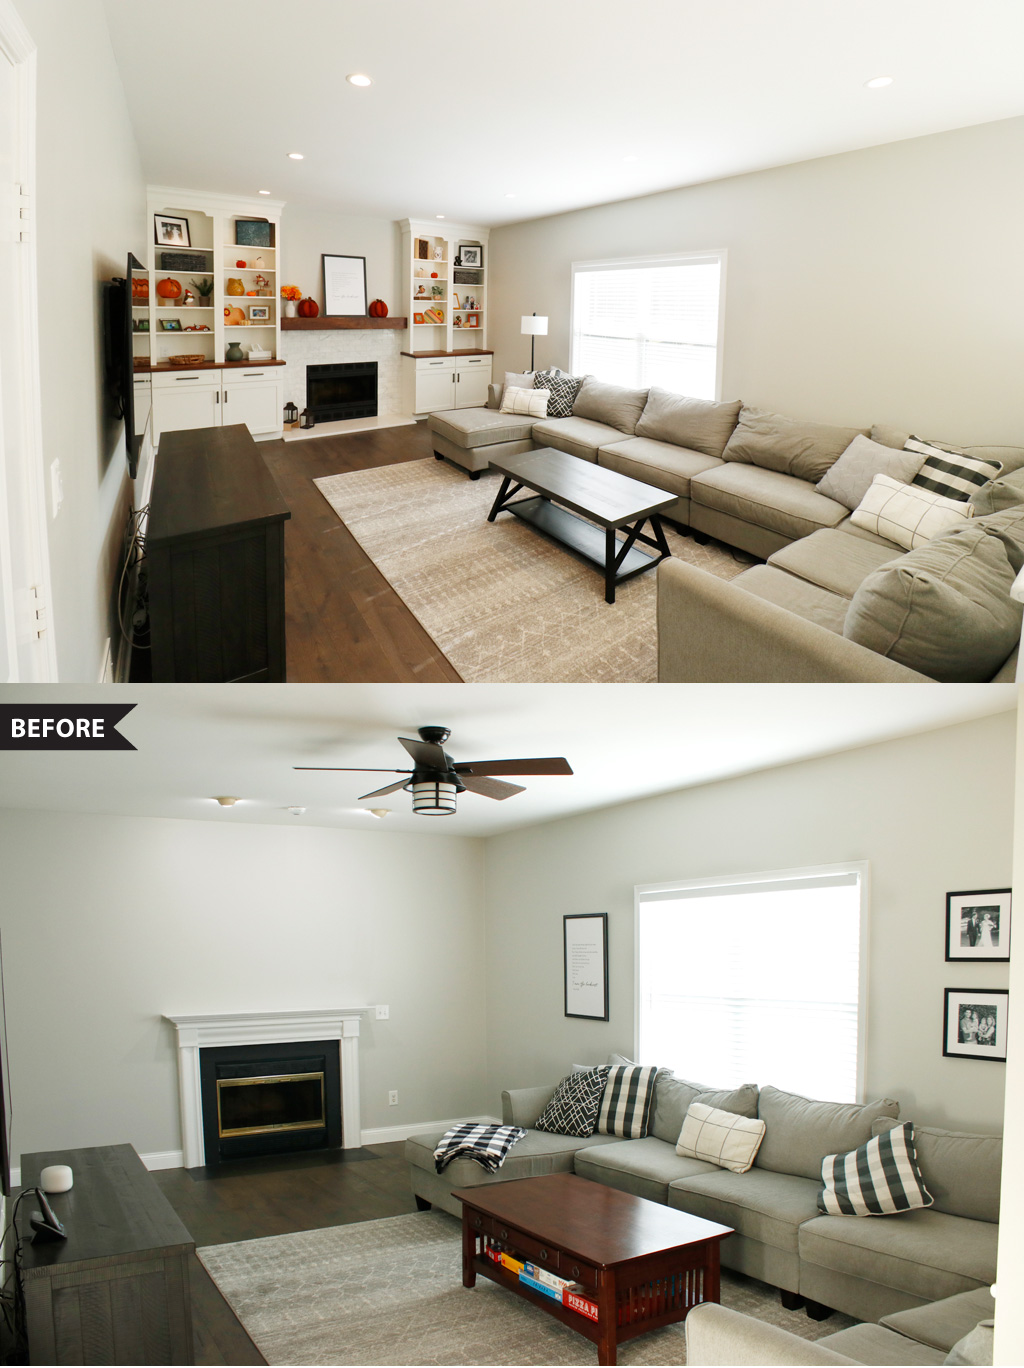 Before and After Photo of Living Room Remodeling Project in Robbinsville NJ by Rasinski Construction